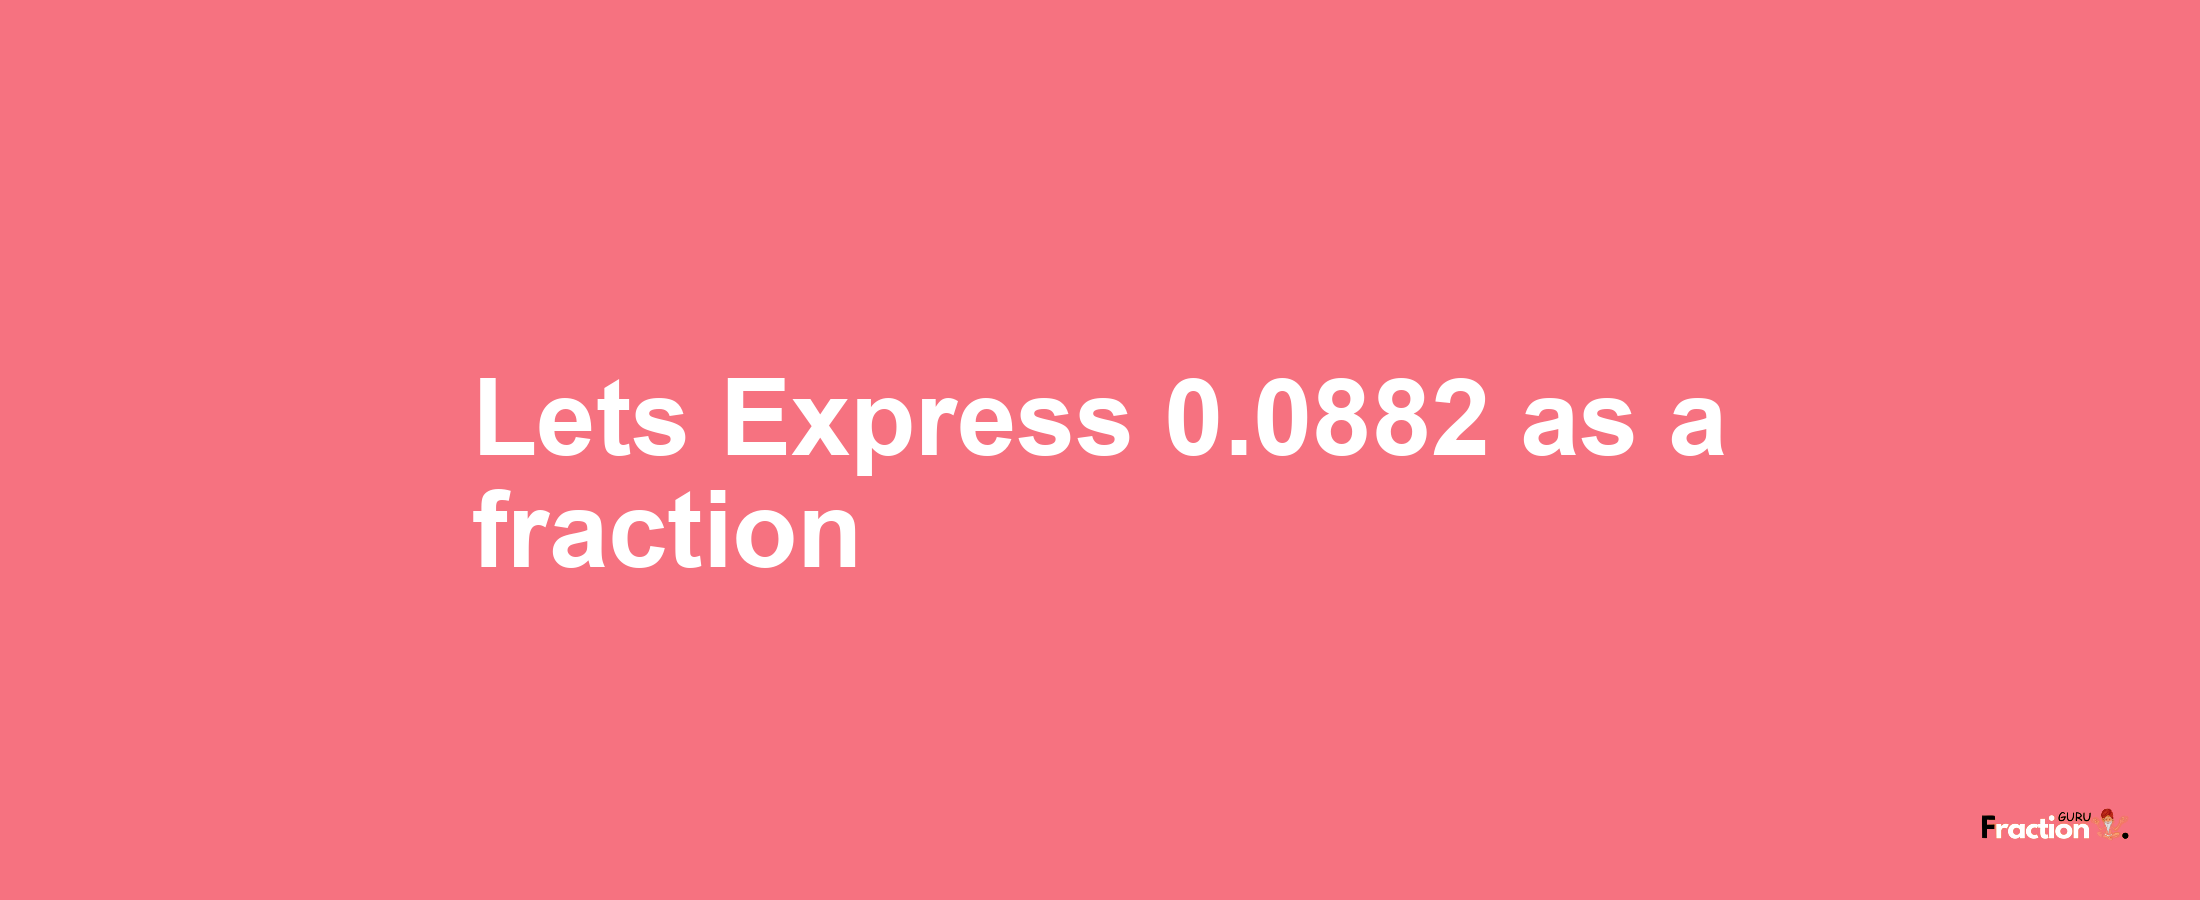 Lets Express 0.0882 as afraction